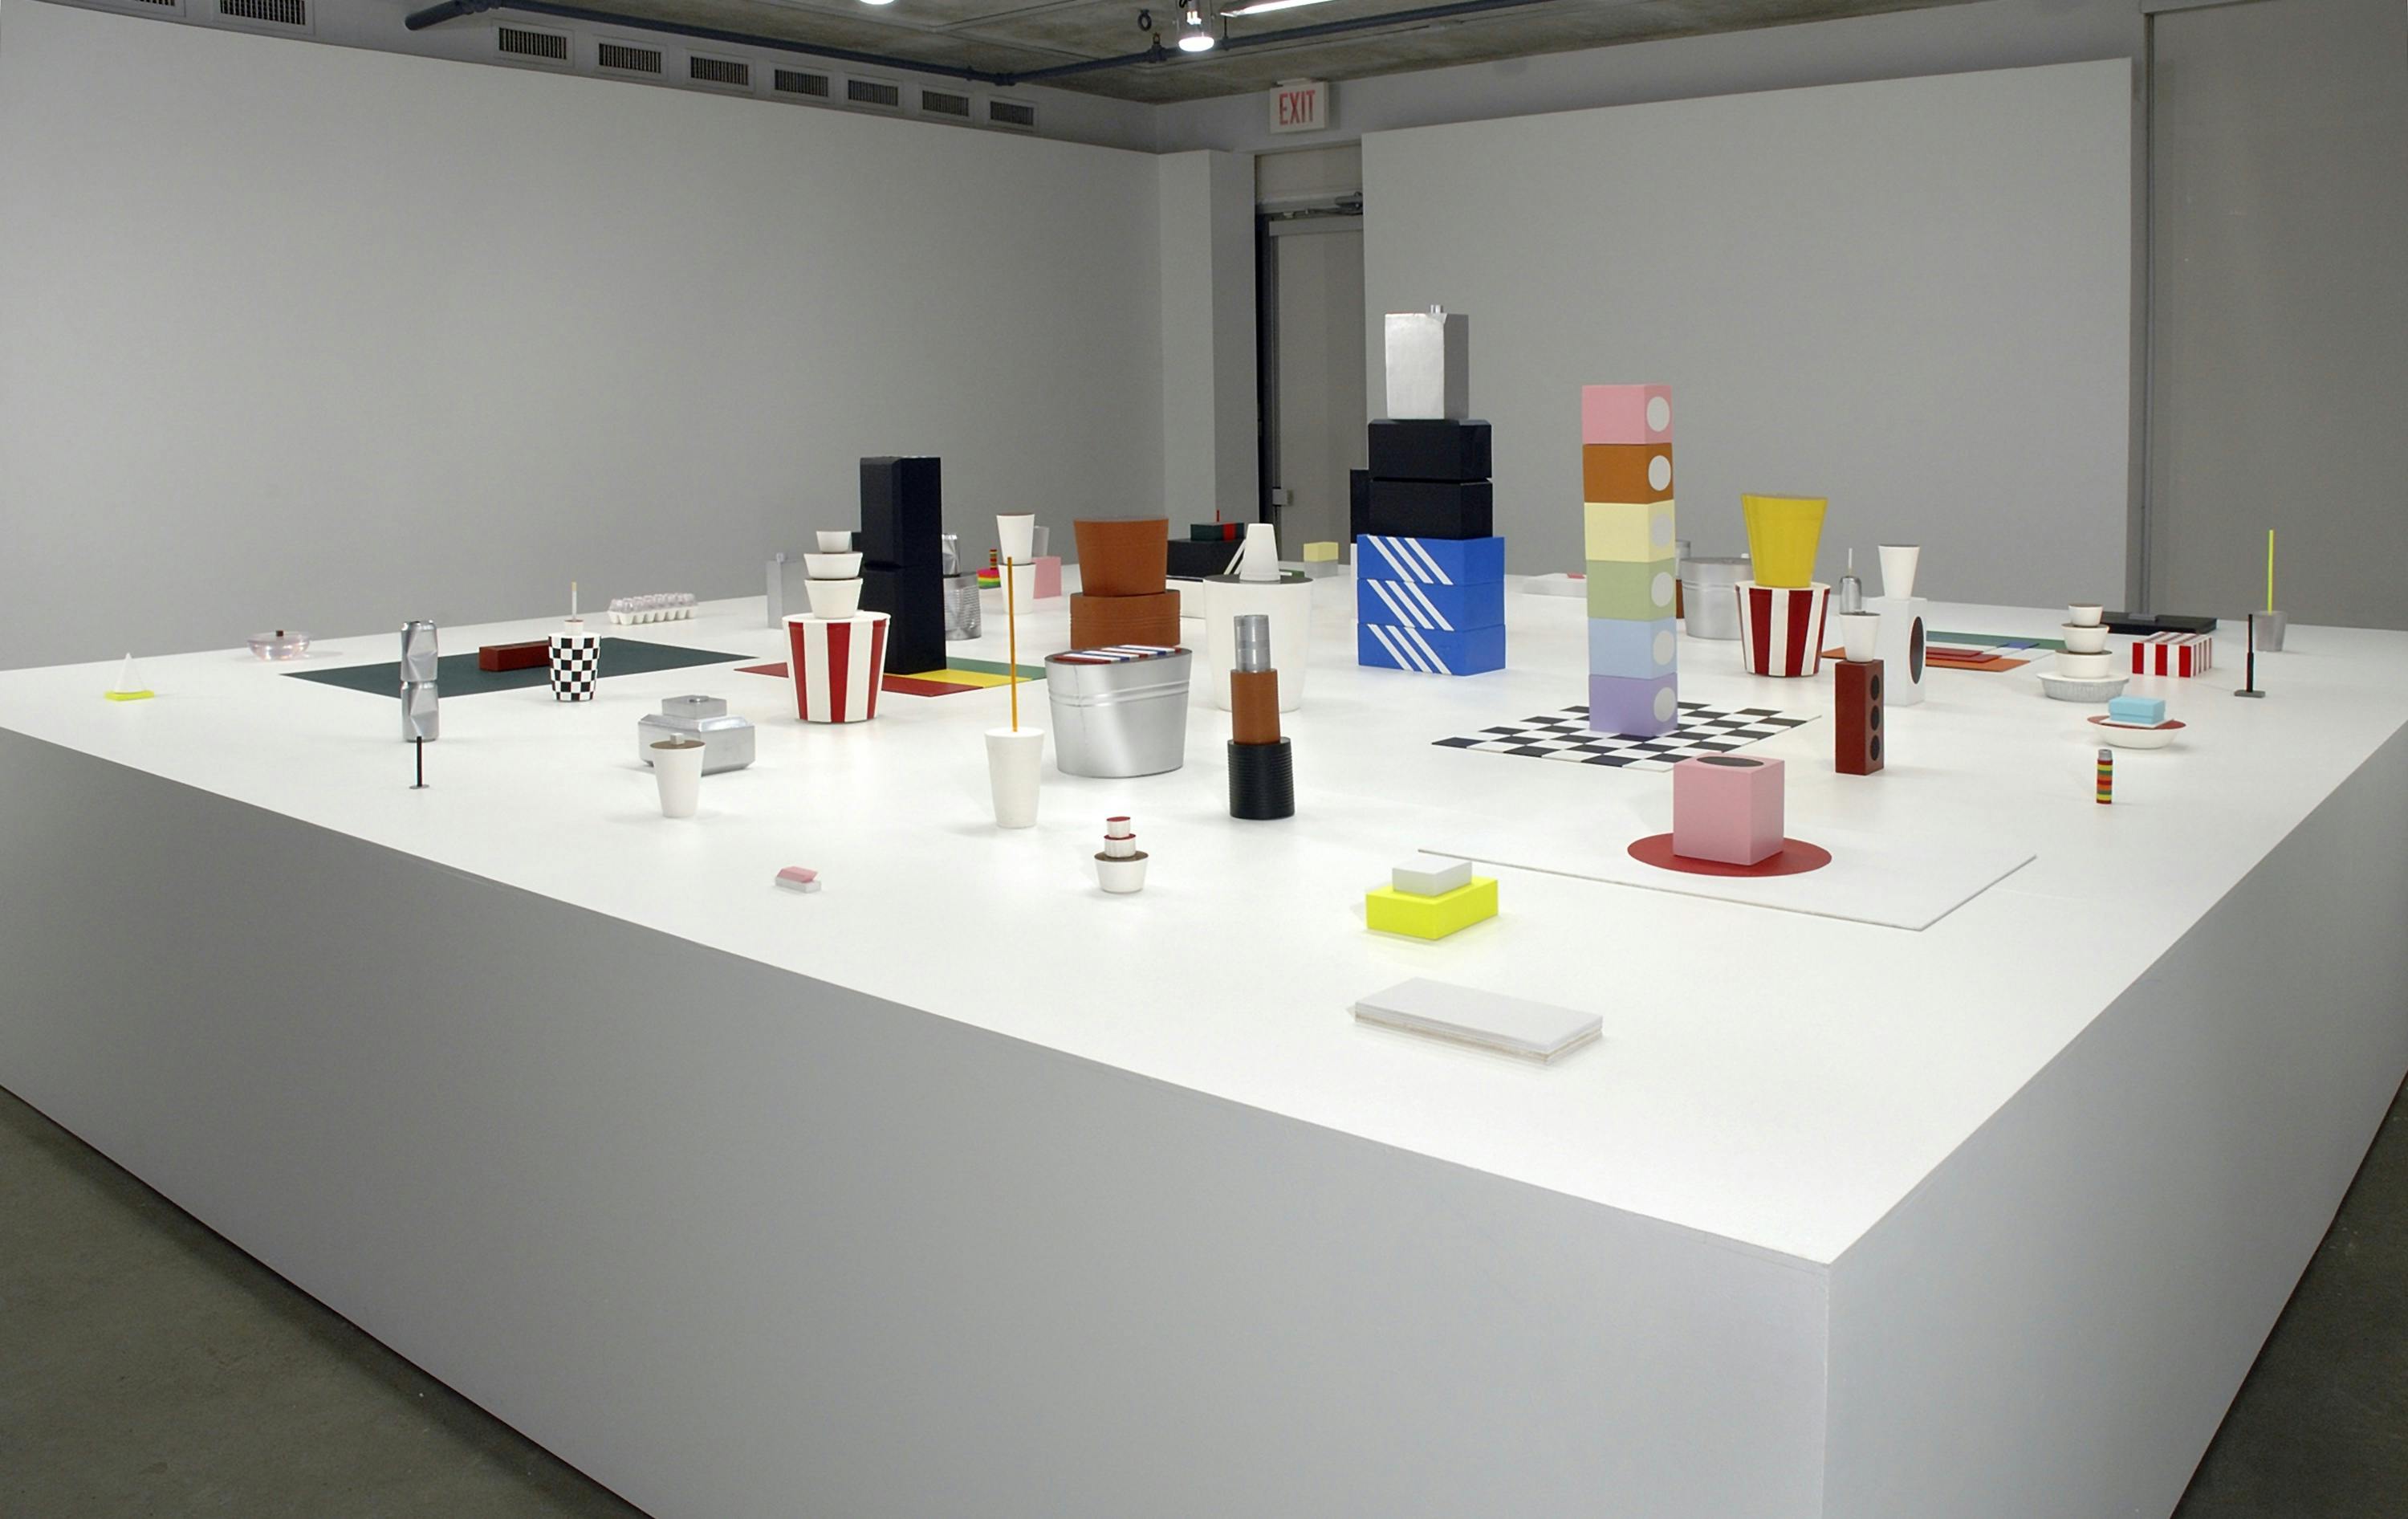 Install image of sculptures on a large low pedestal placed in a gallery. Sculptures vary in size, shape, and colour. They mimic commercial objects and icons such as Kentucky Fried Chicken bucket and Hudson’s Bay stripes.